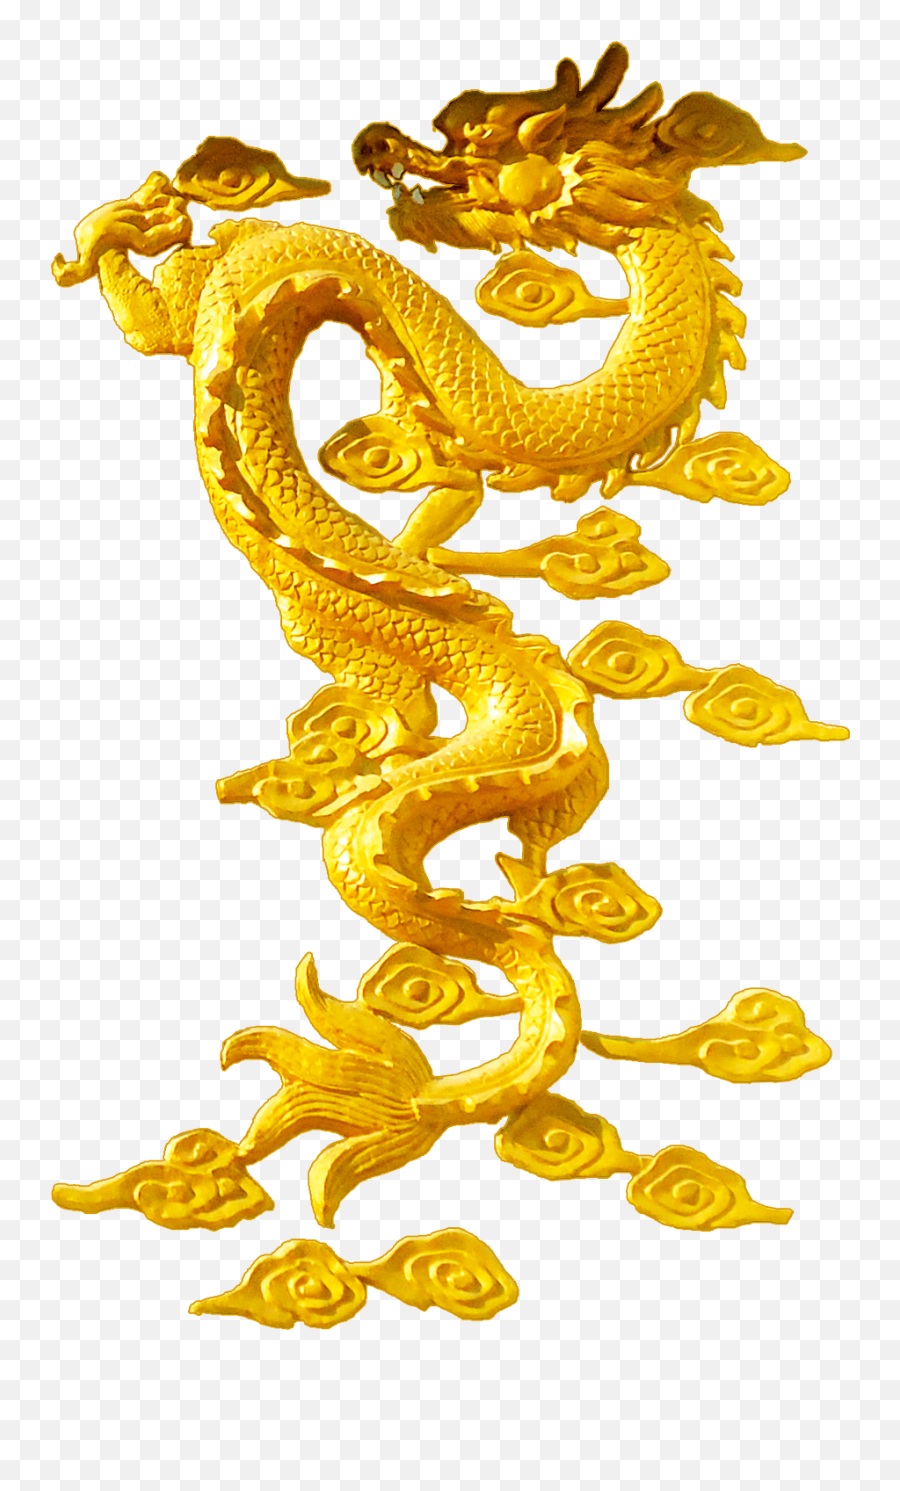 Chinese Dragon - Golden Dragon Png Download 15011501 Chinese Dragon Gold Png,Dragon Transparent